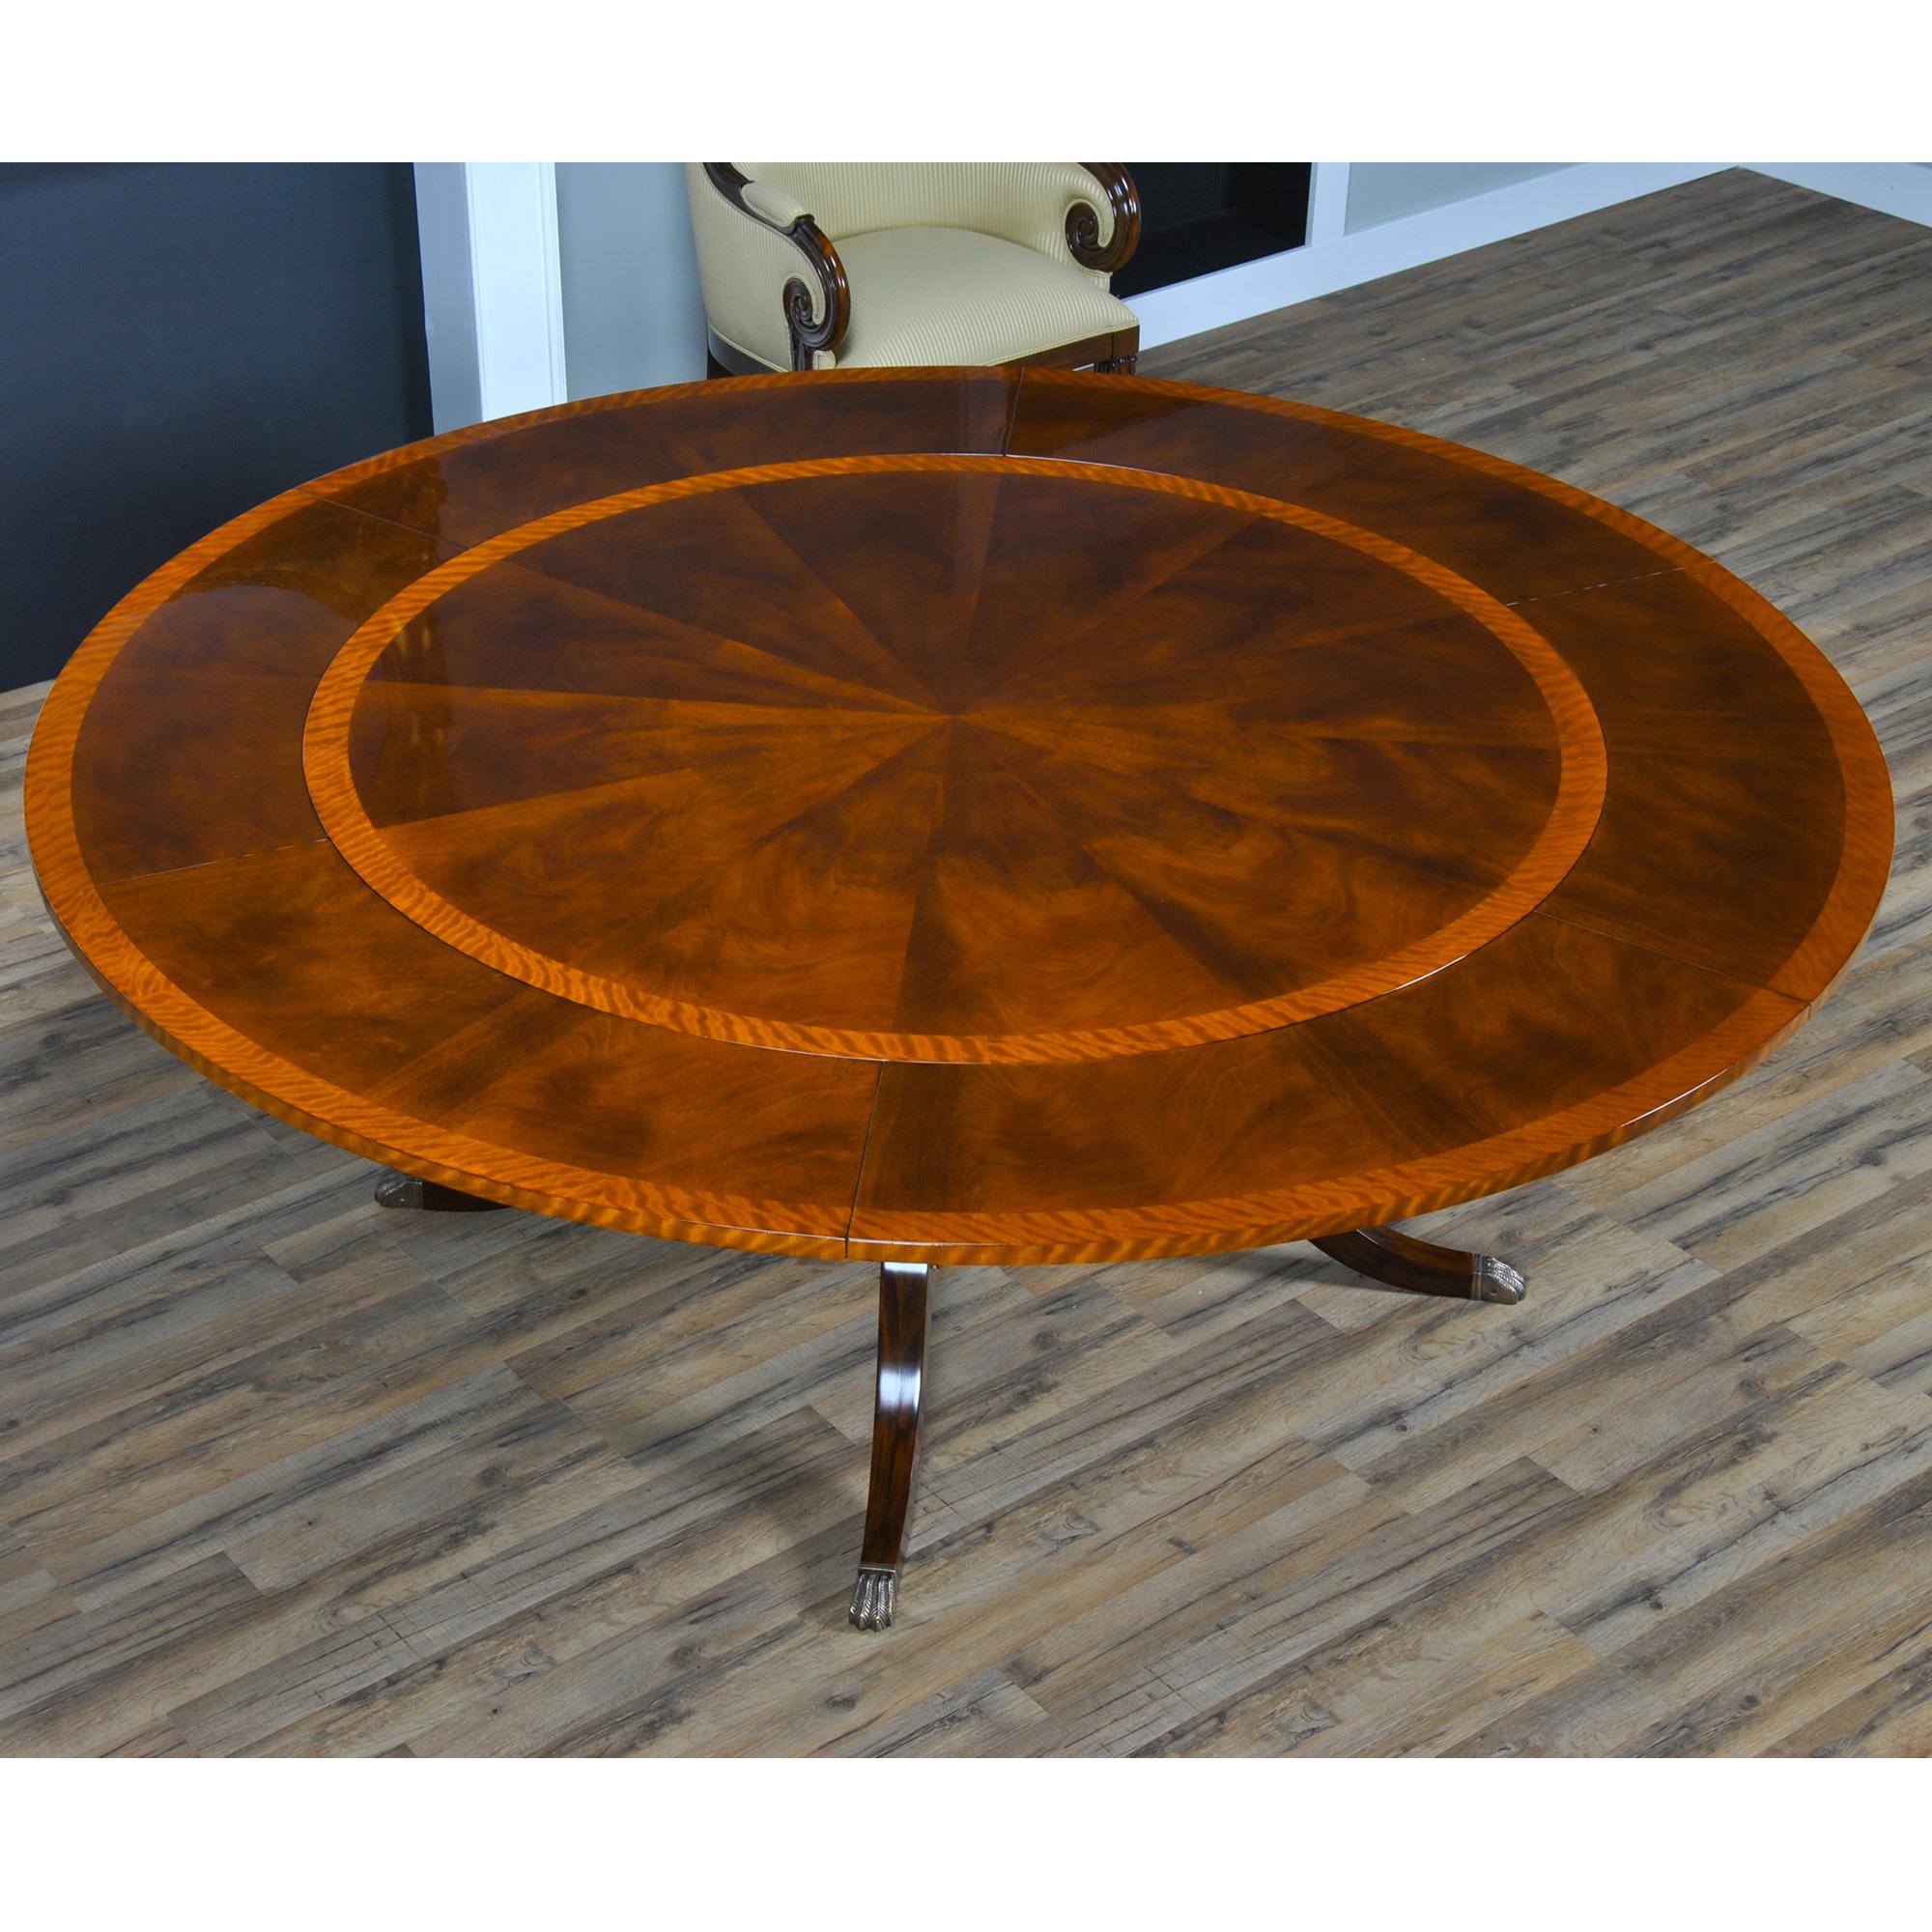 The 84 inch Round Perimeter Table is produced with a figured mahogany field and satinwood banding on the top which makes for an interesting contrast. Surrounding the 60″ round top can be placed six leaves which rest on pullout slides and are